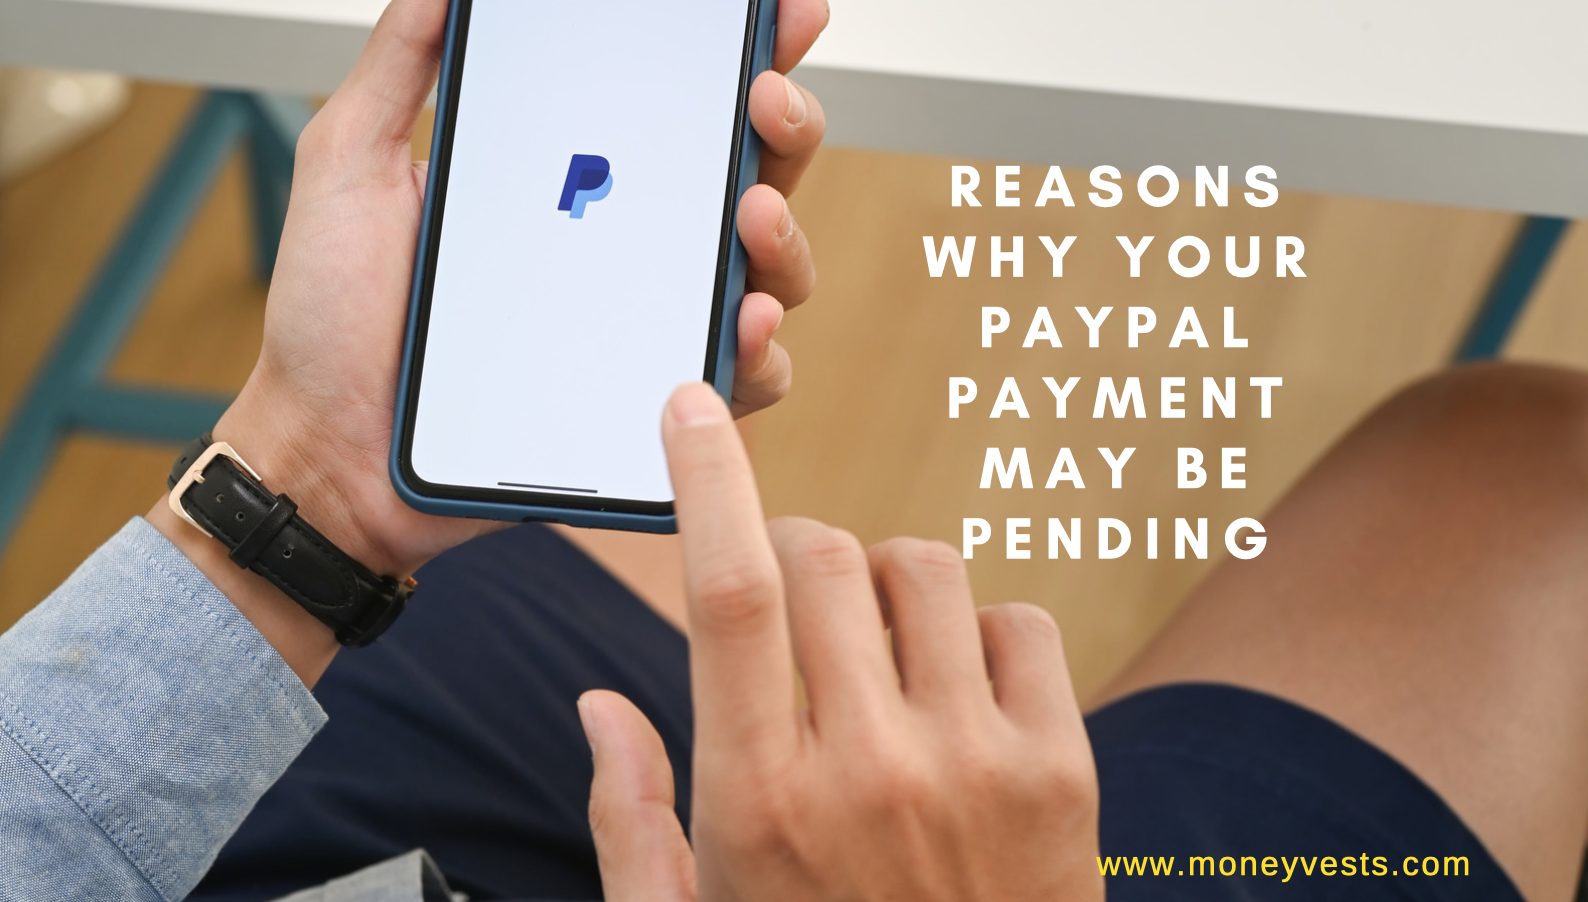 Reasons Why Your PayPal Payment May Be Pending